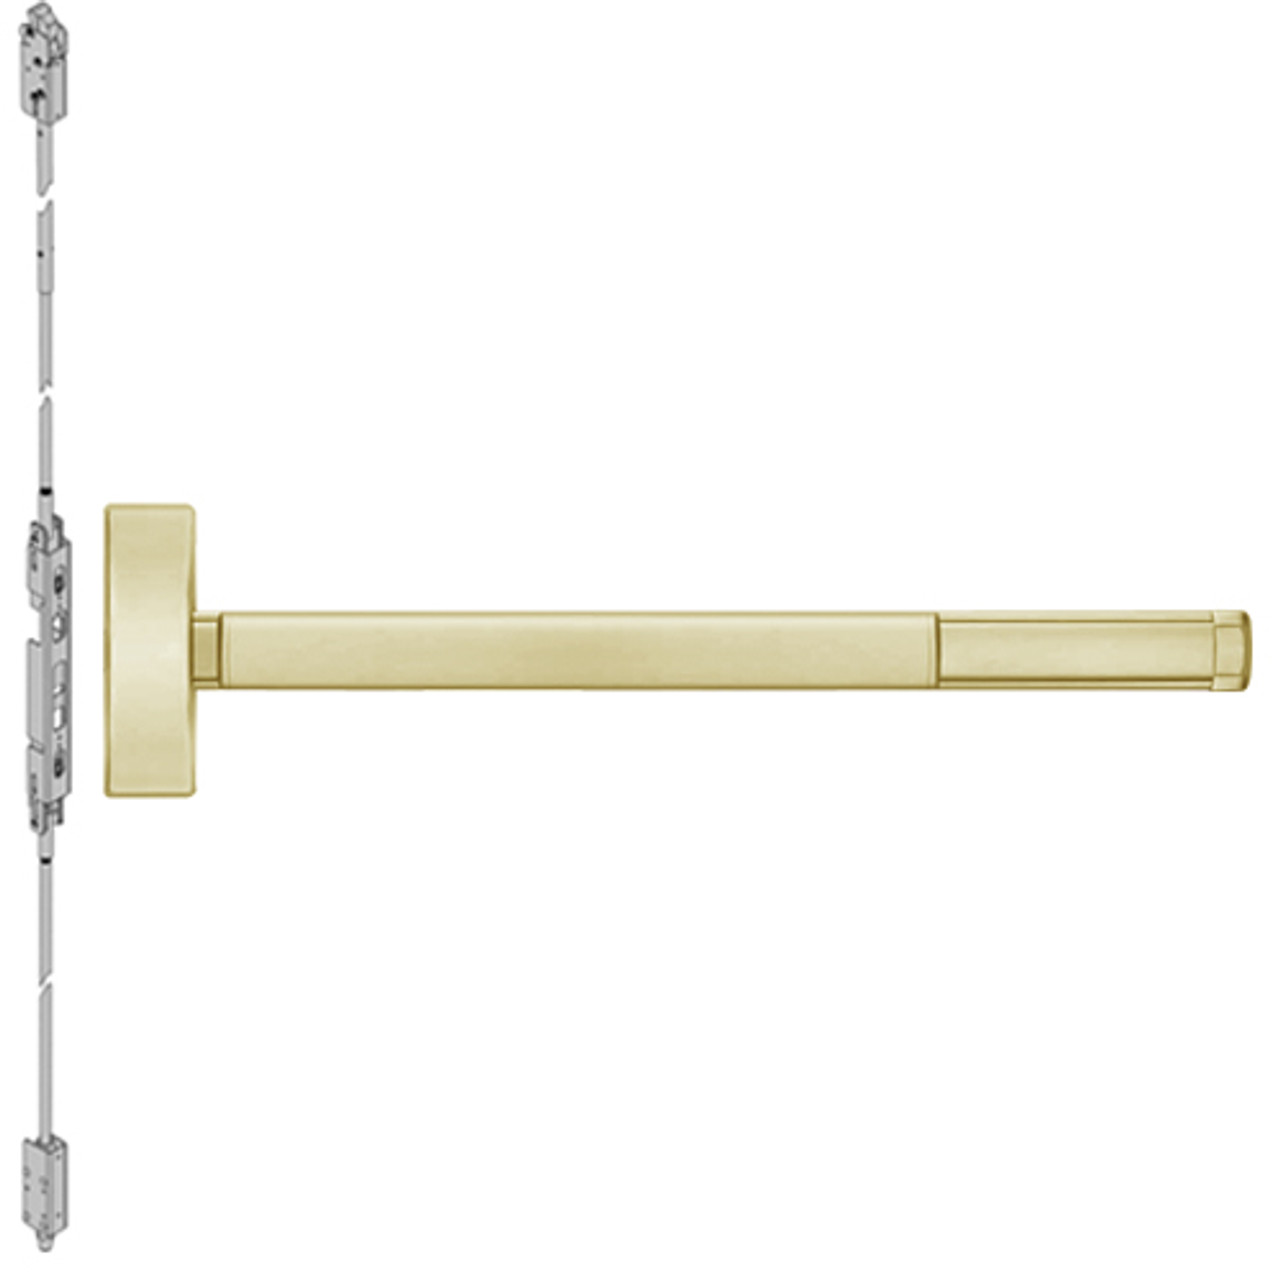 MLR2801-606-48 PHI 2800 Series Concealed Vertical Rod Exit Device with Motorized Latch Retraction Prepped for Cover Plate in Satin Brass Finish